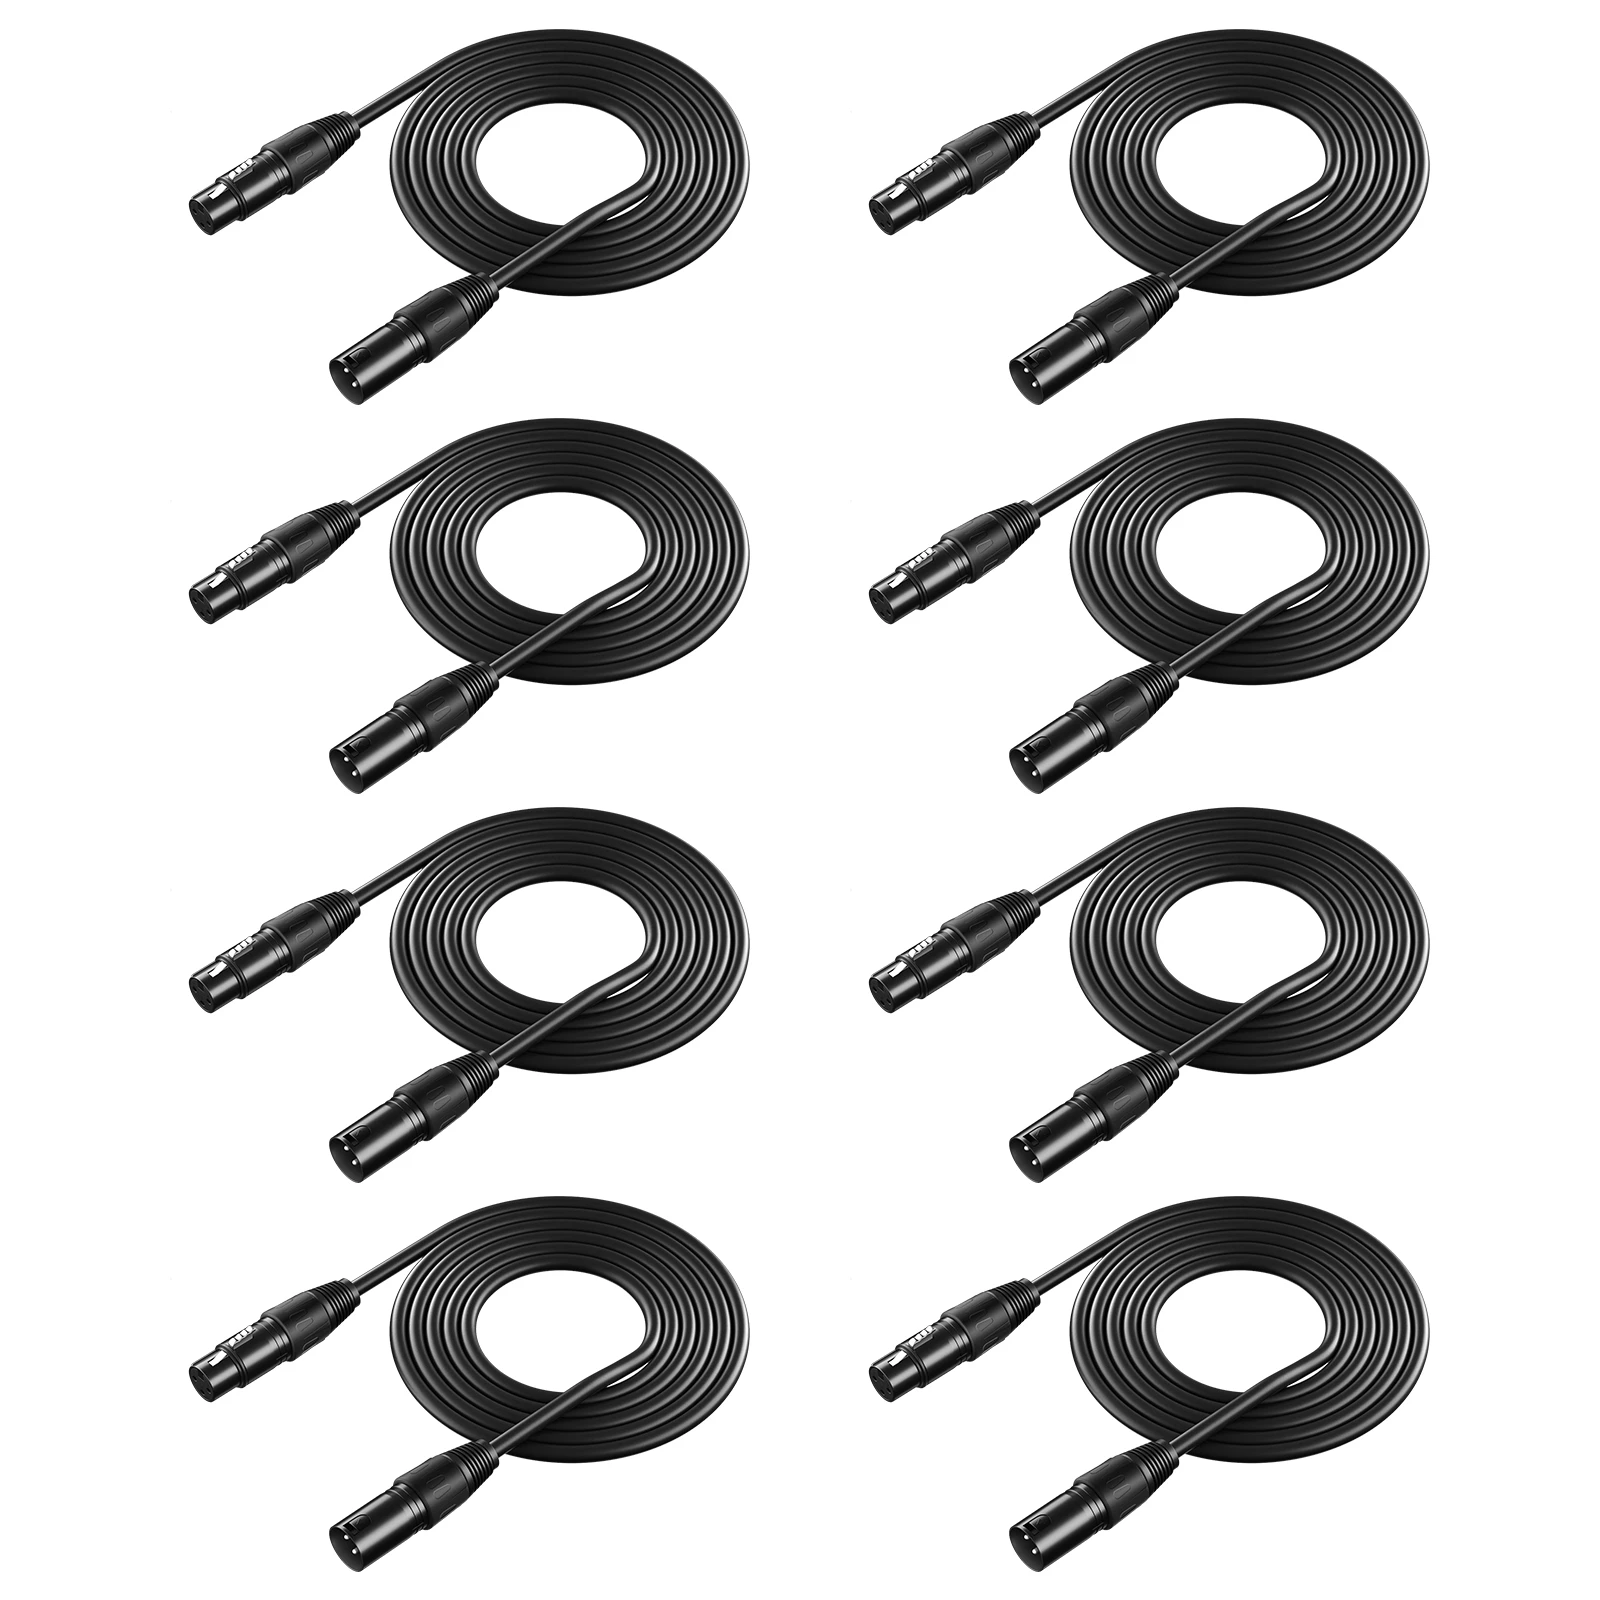 Neewer 8 Pack 6.5 Feet/2 Meters Dmx Stage Light Cable Wires 3 Pin Signal  Xlr Male To Female Connection For Moving Head Light - Audio & Video Cables  - AliExpress